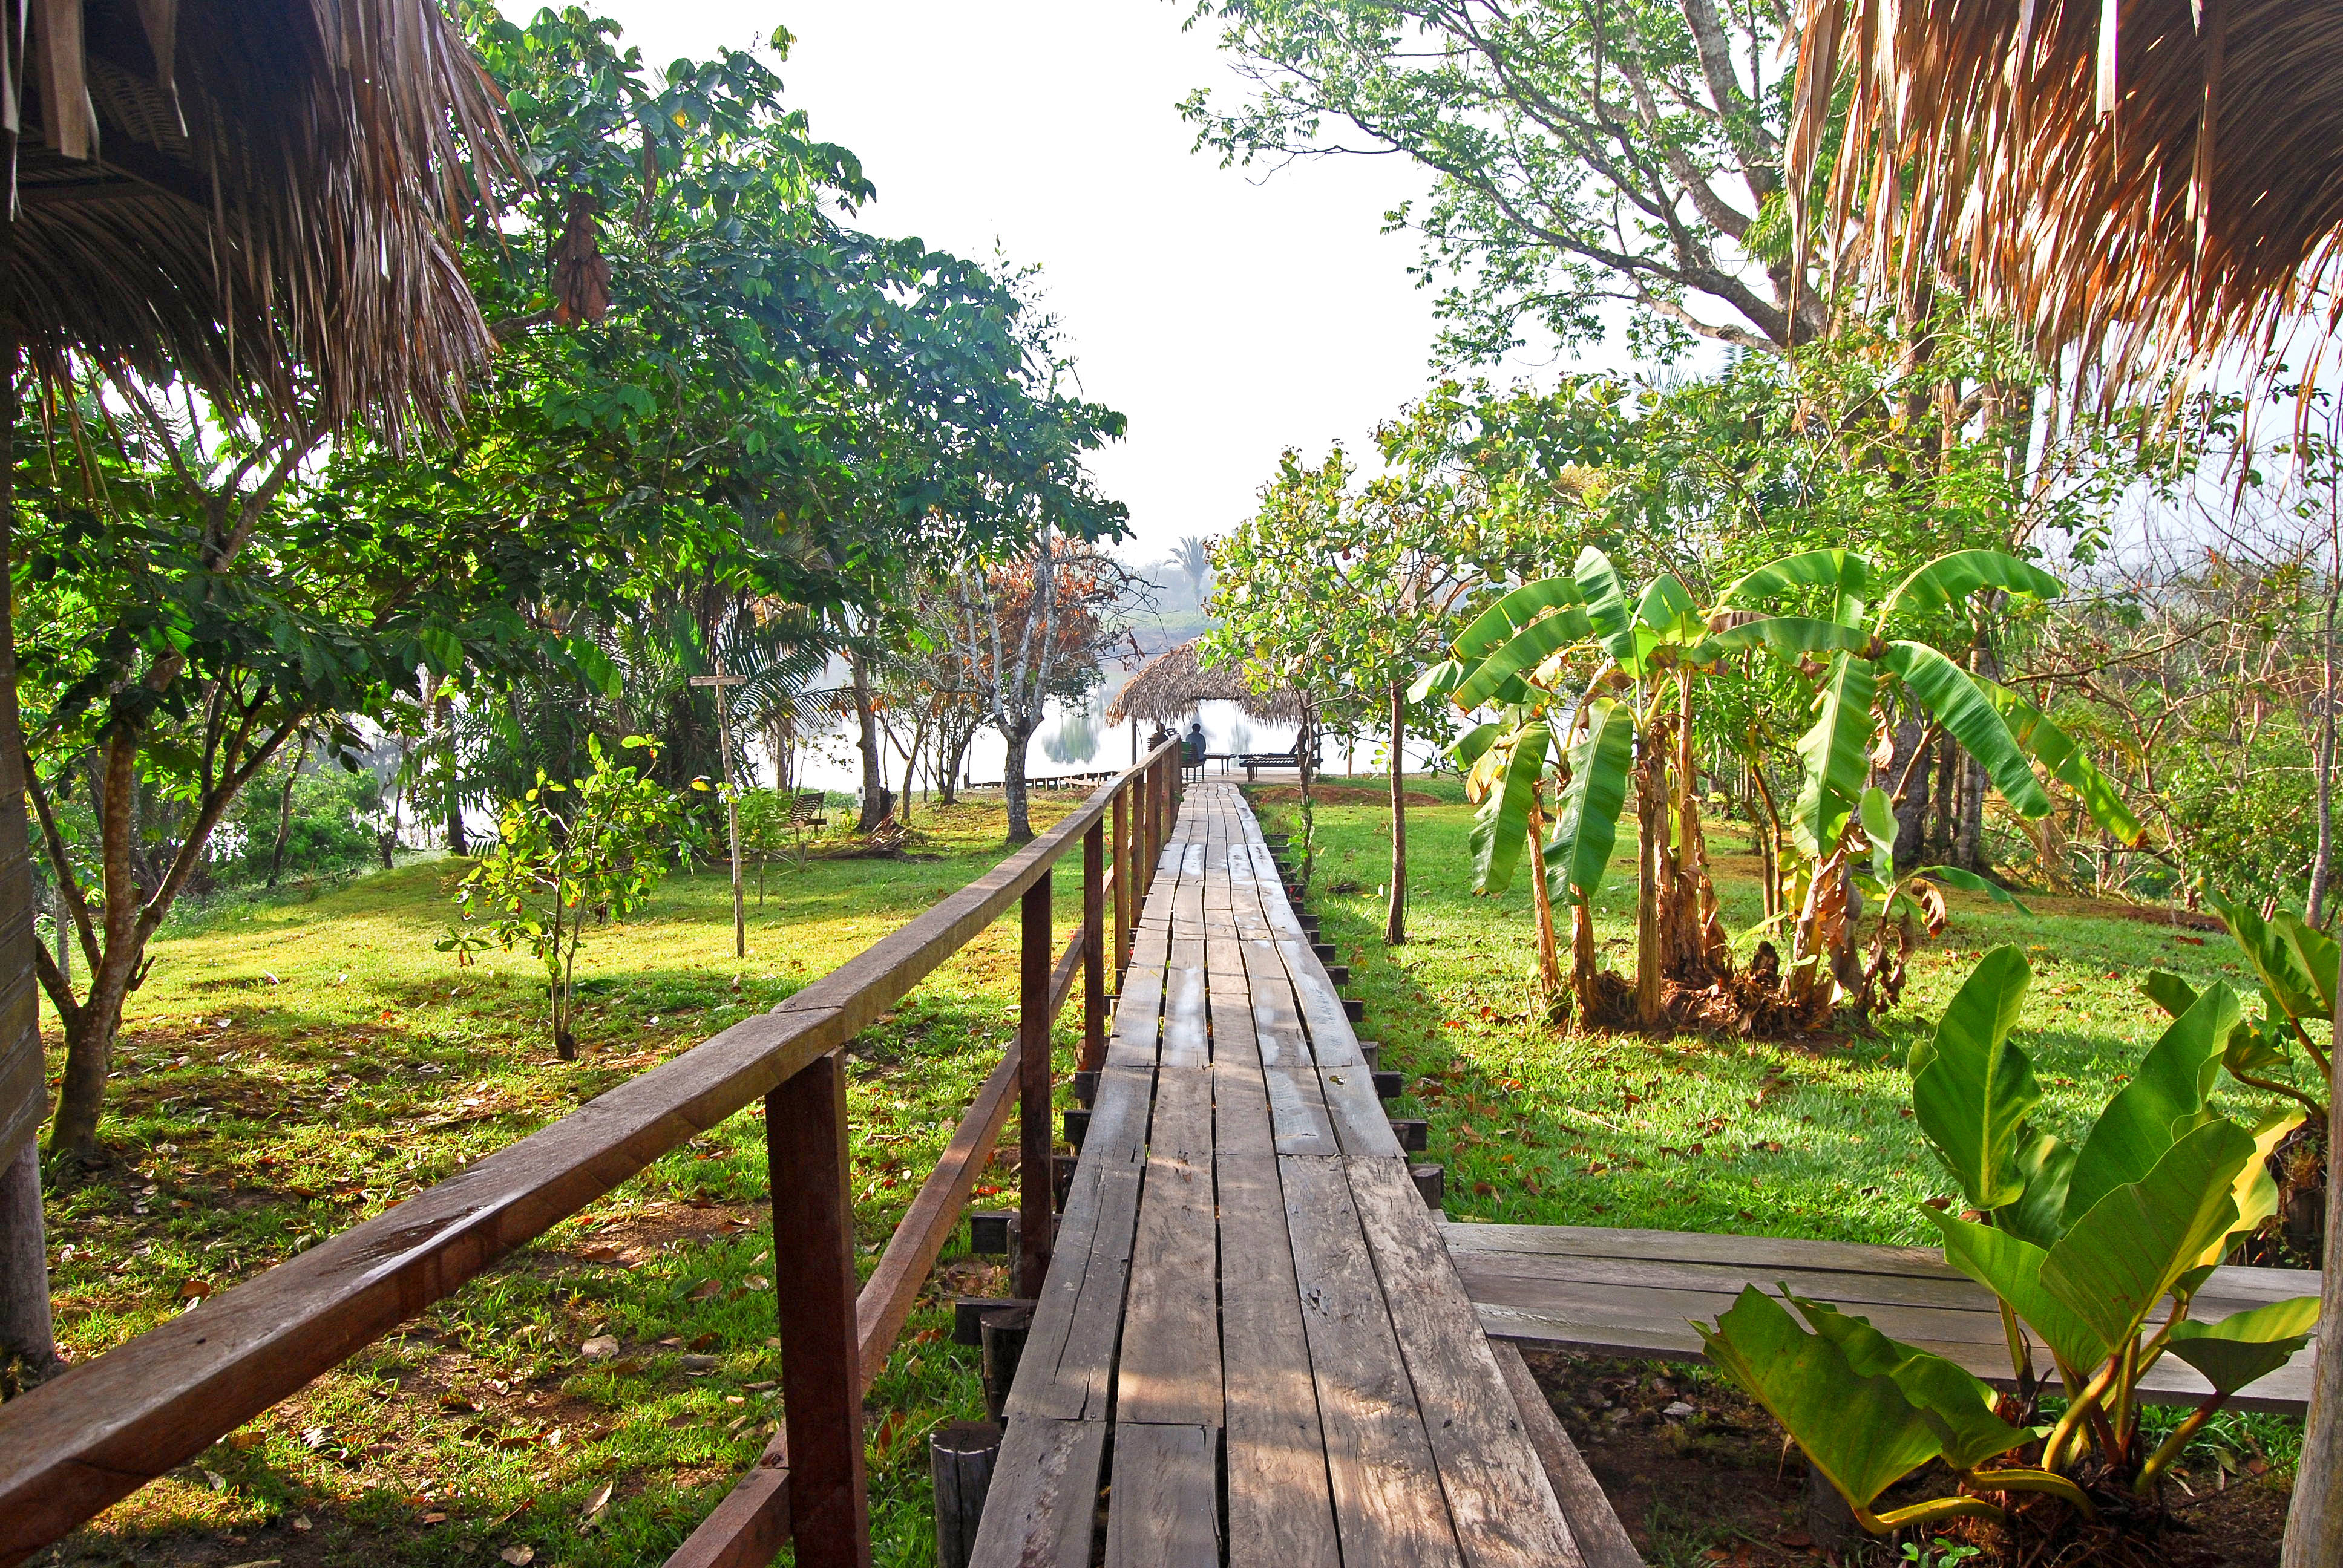 Visit the Best Places Near the Equator - Amazon River Footpath in Brazil